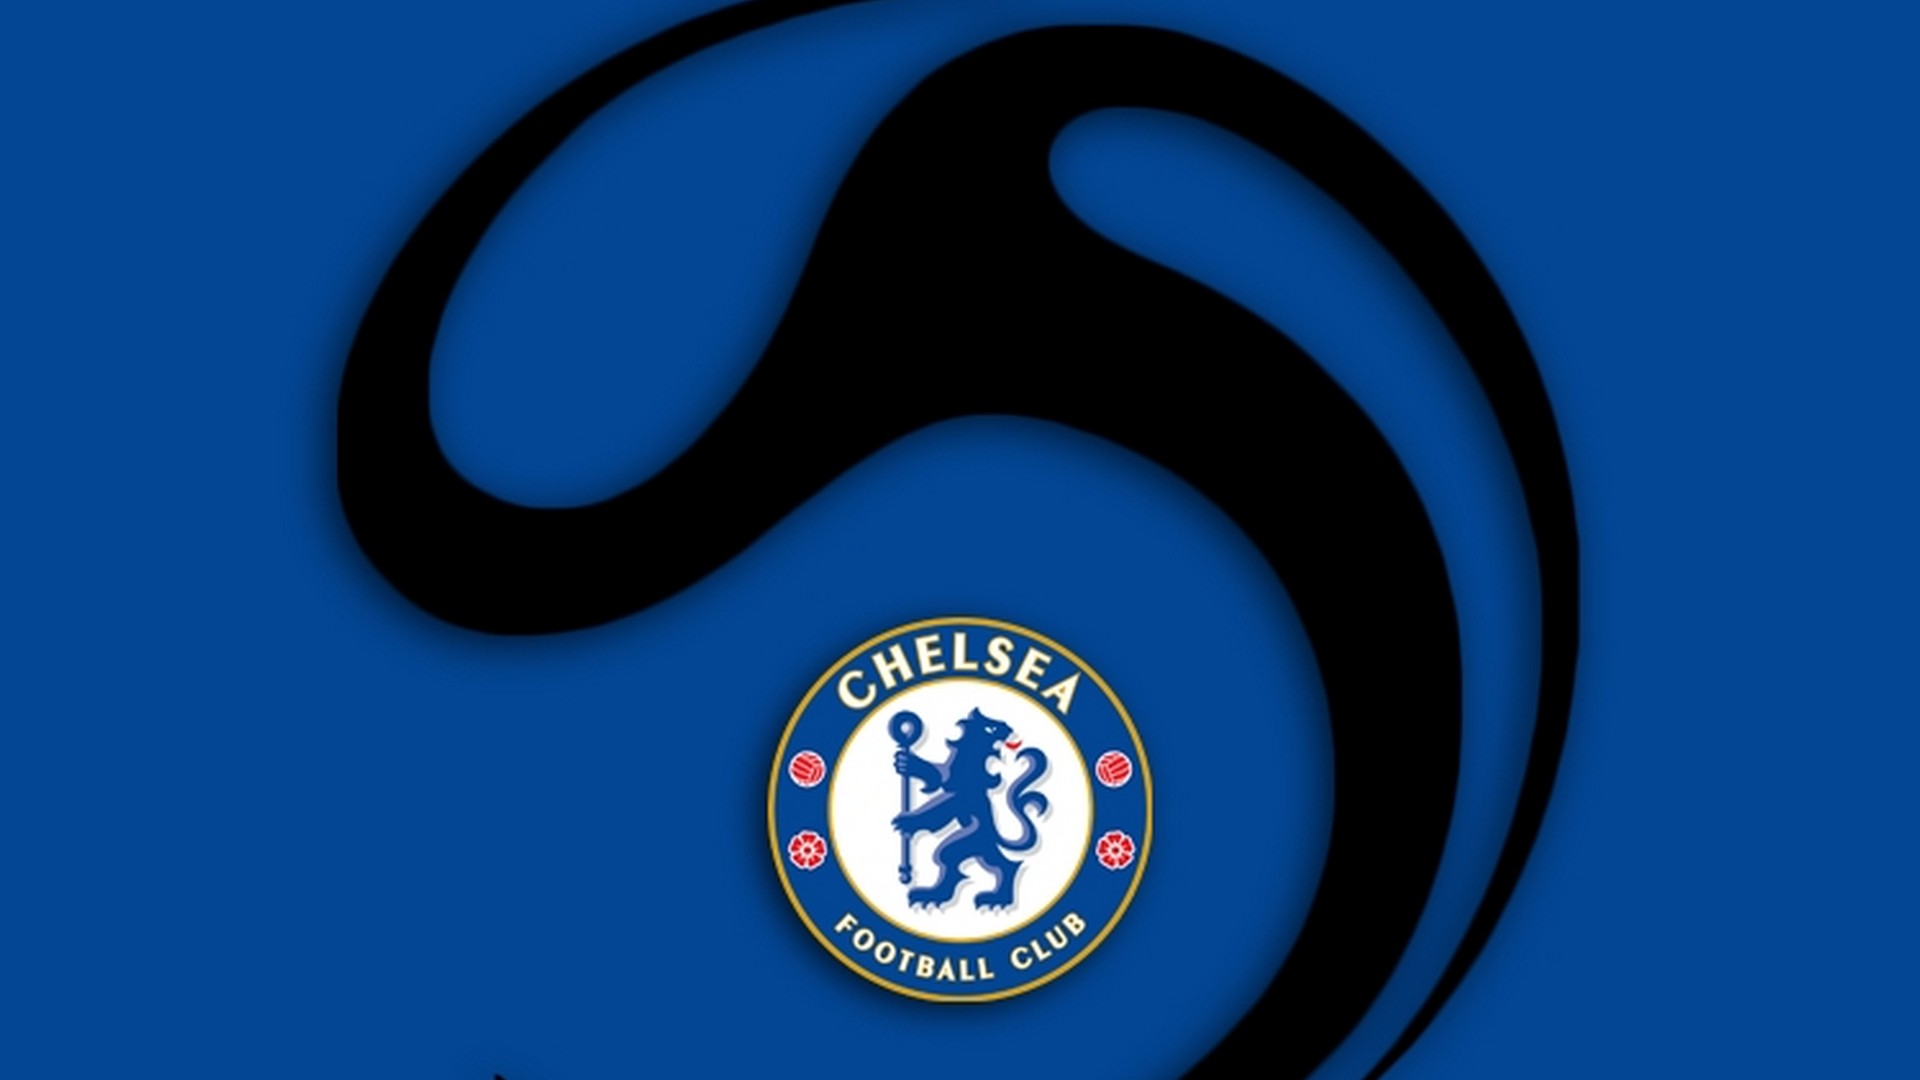 Chelsea Desktop Wallpaper with high-resolution 1920x1080 pixel. You can use this wallpaper for your Desktop Computers, Mac Screensavers, Windows Backgrounds, iPhone Wallpapers, Tablet or Android Lock screen and another Mobile device